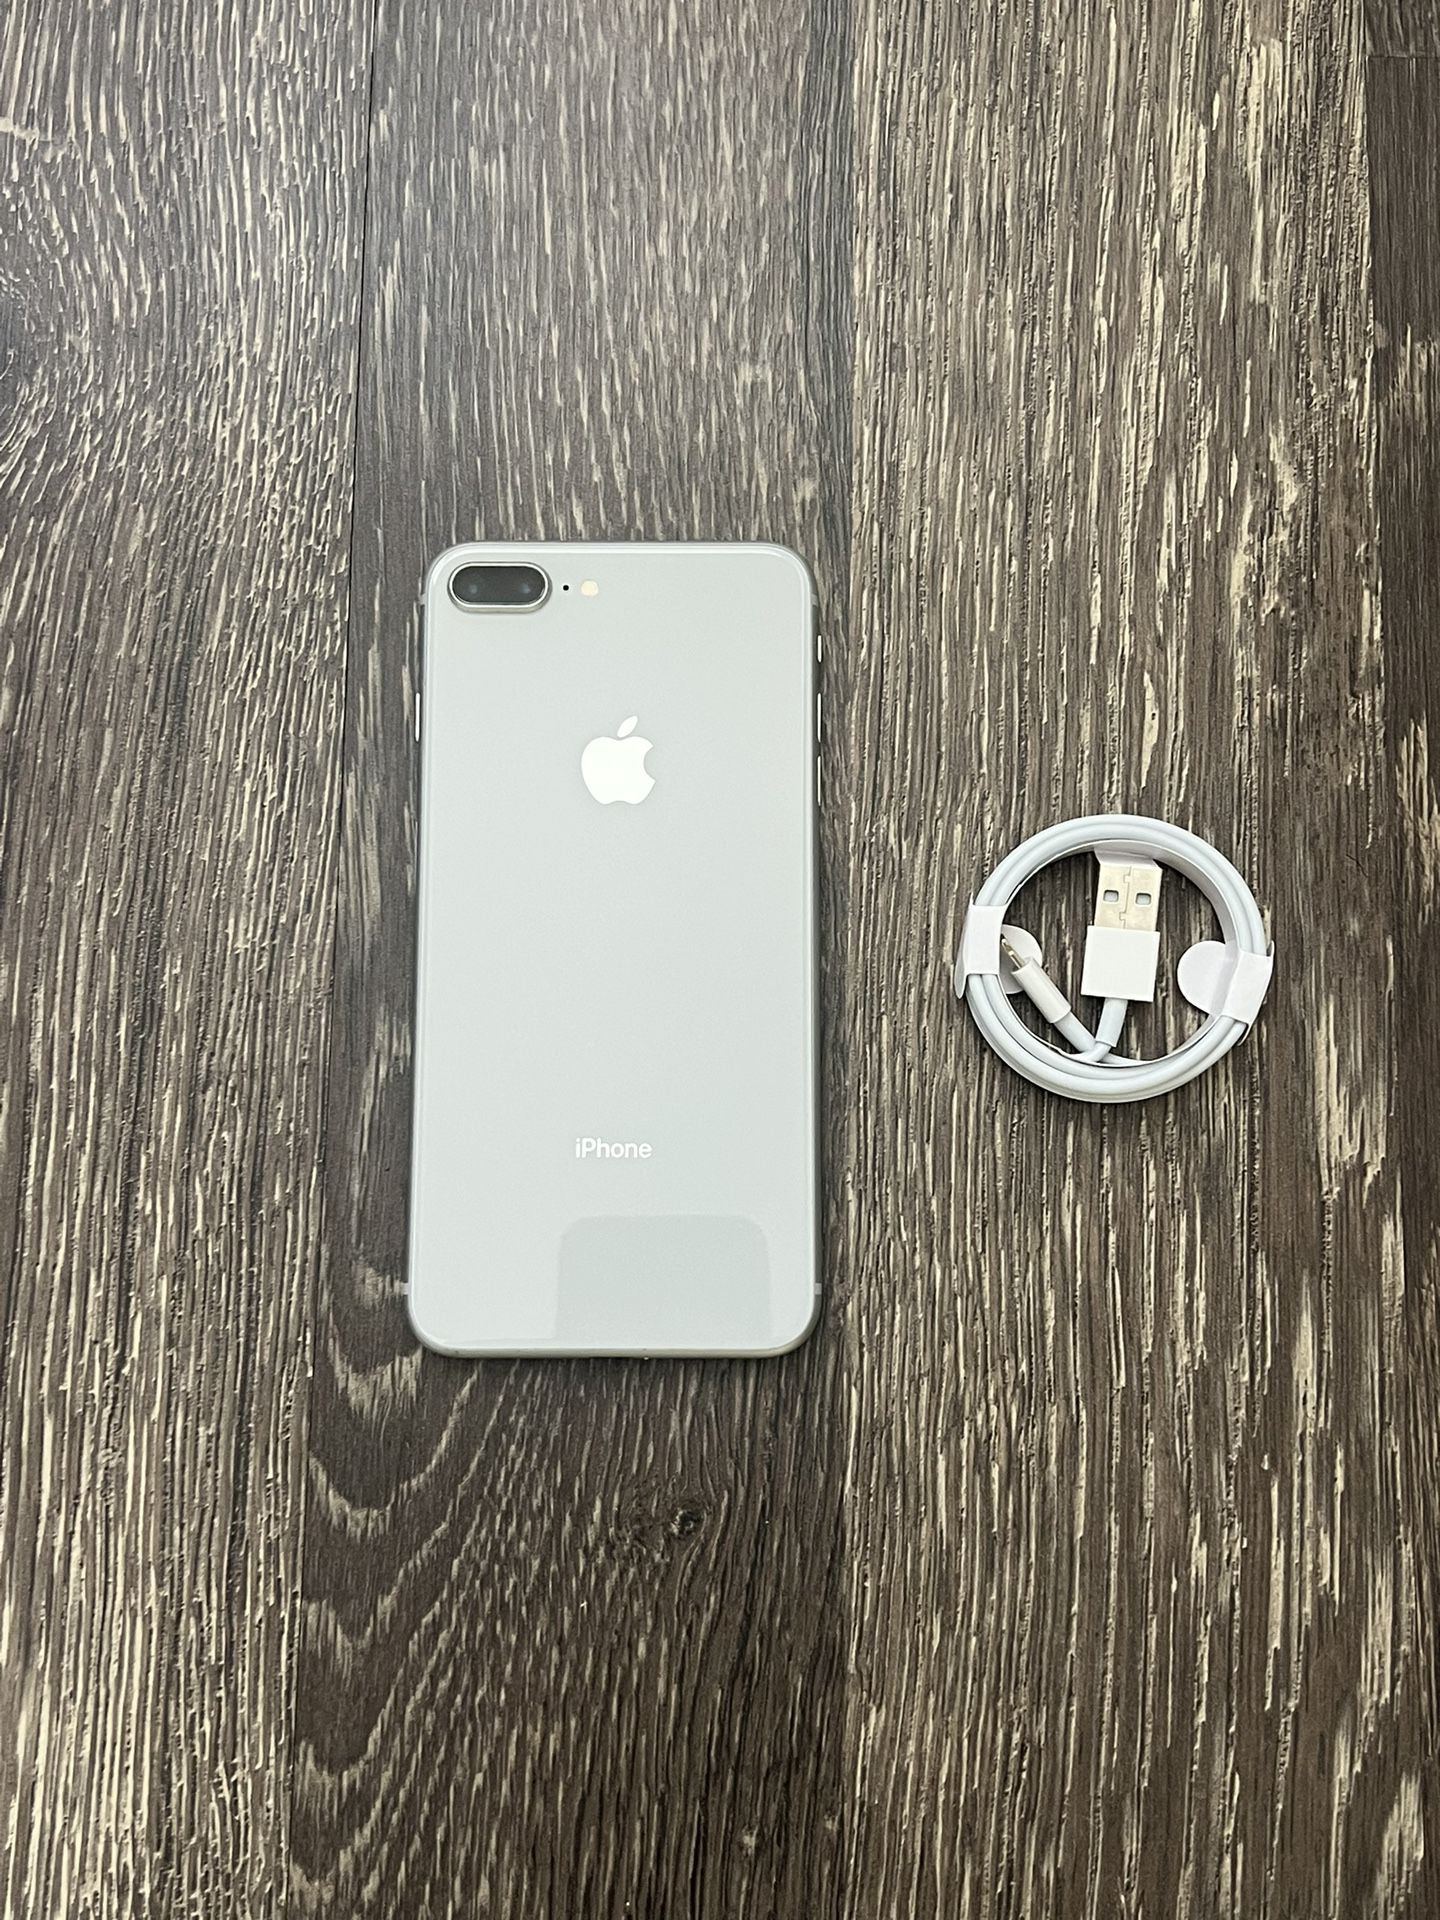 iPhone 8 Plus Silver UNLOCKED FOR ALL CARRIERS!